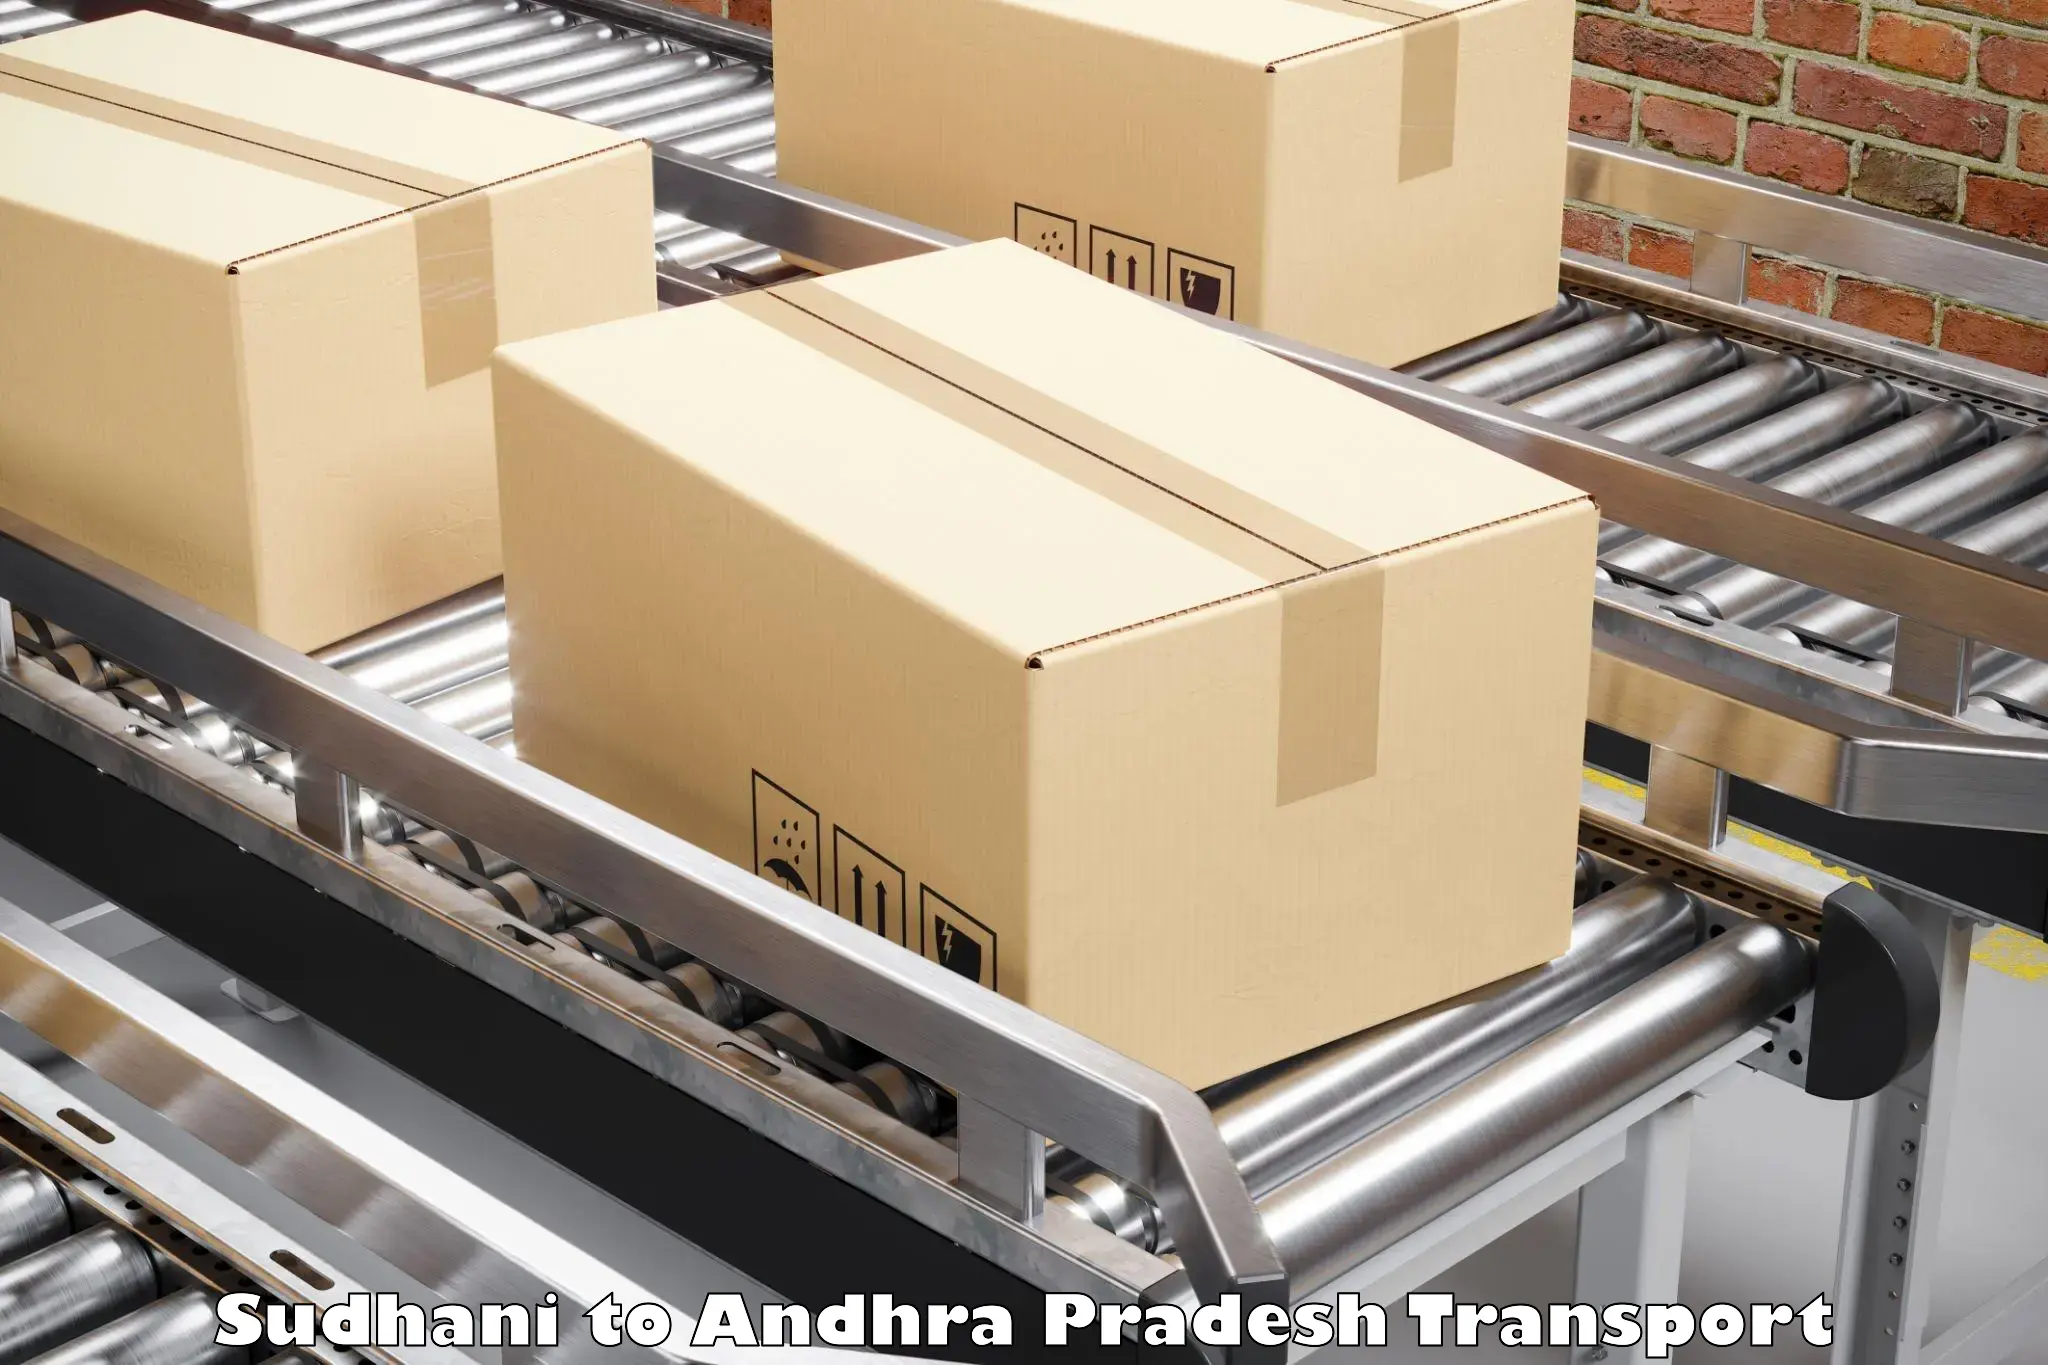 Truck transport companies in India Sudhani to Visakhapatnam